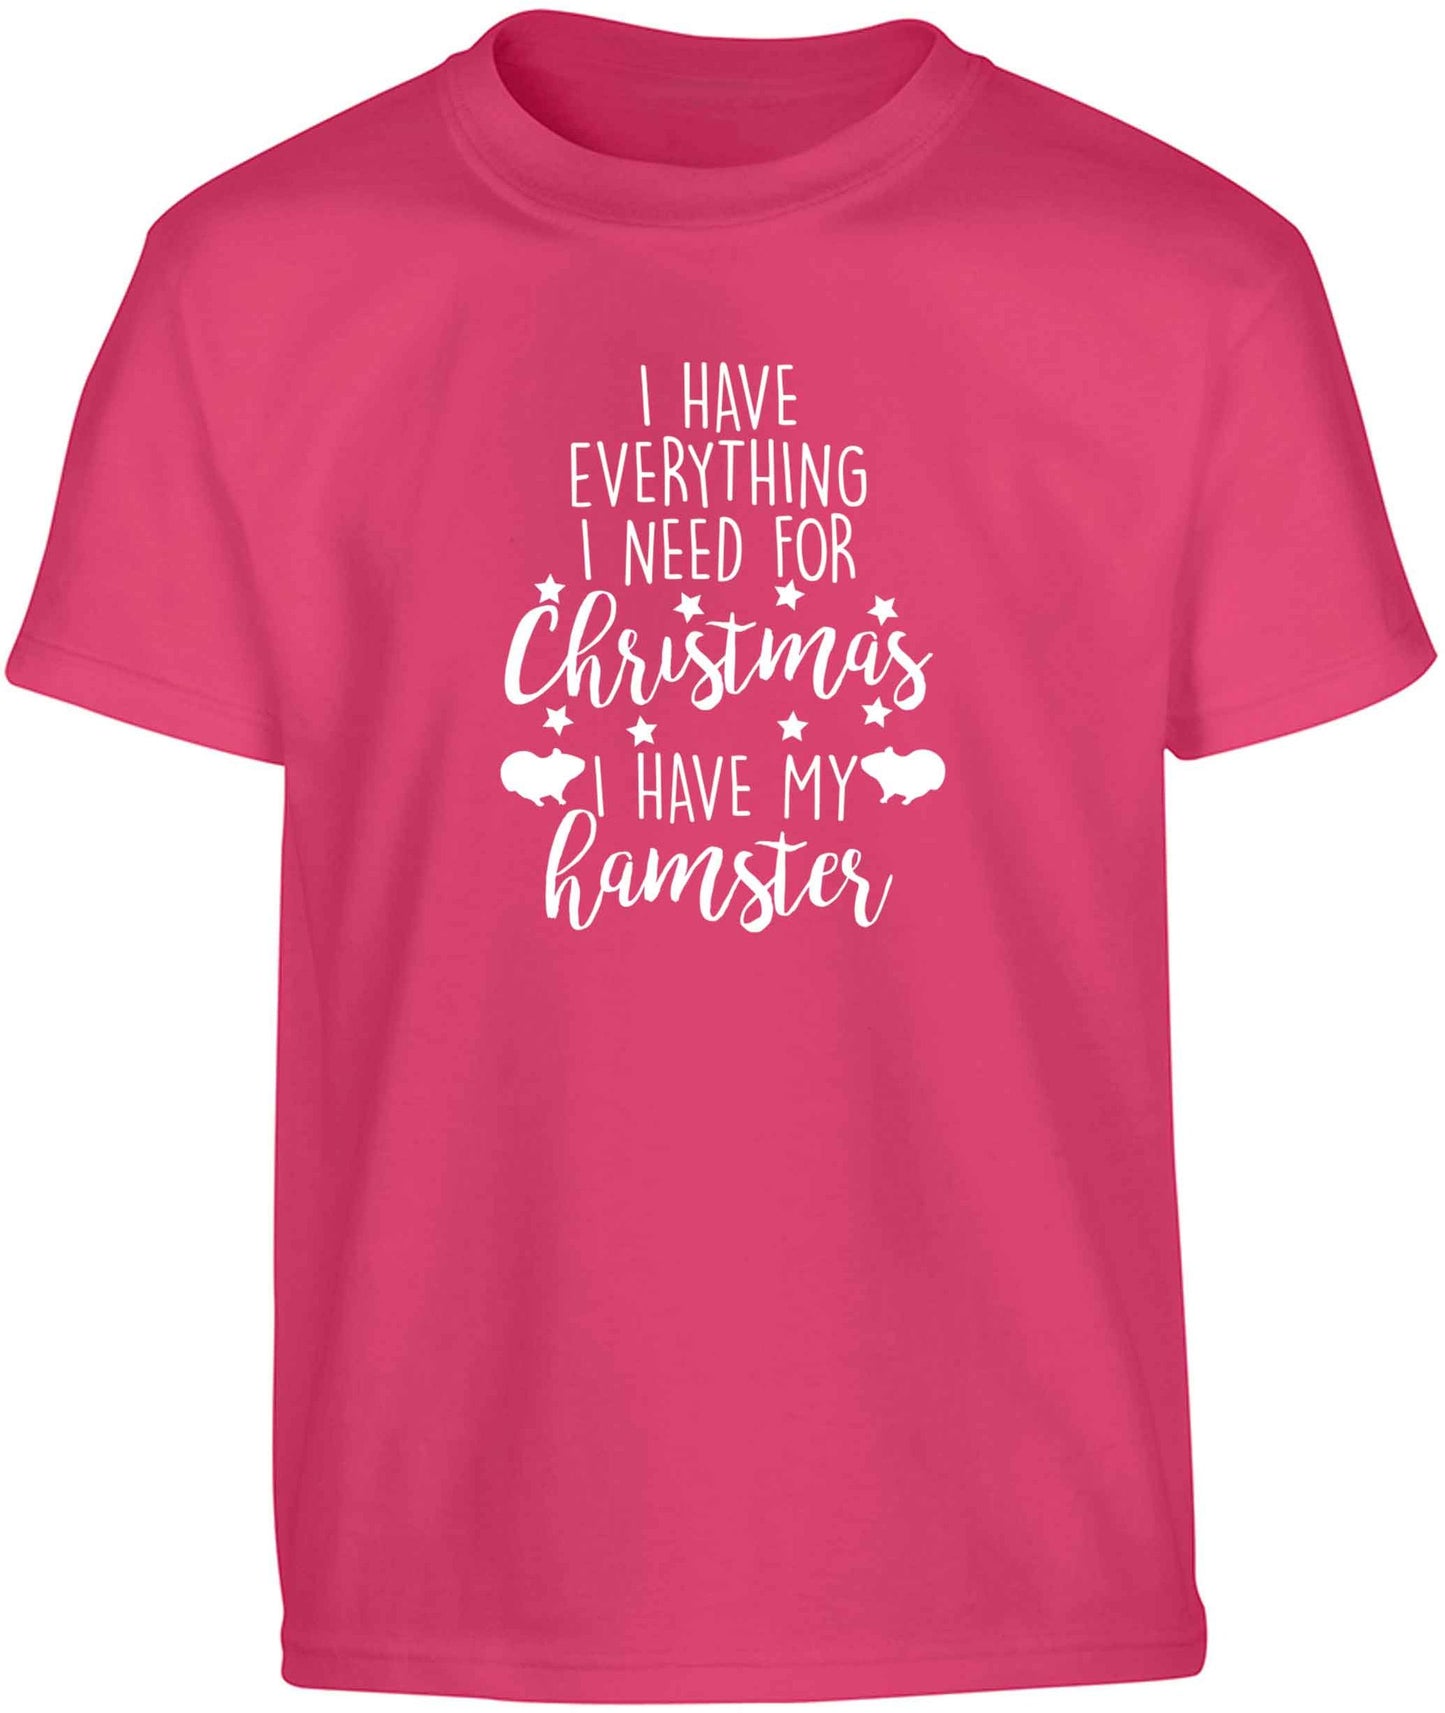 I have everything I need for Christmas I have my hamster Children's pink Tshirt 12-13 Years